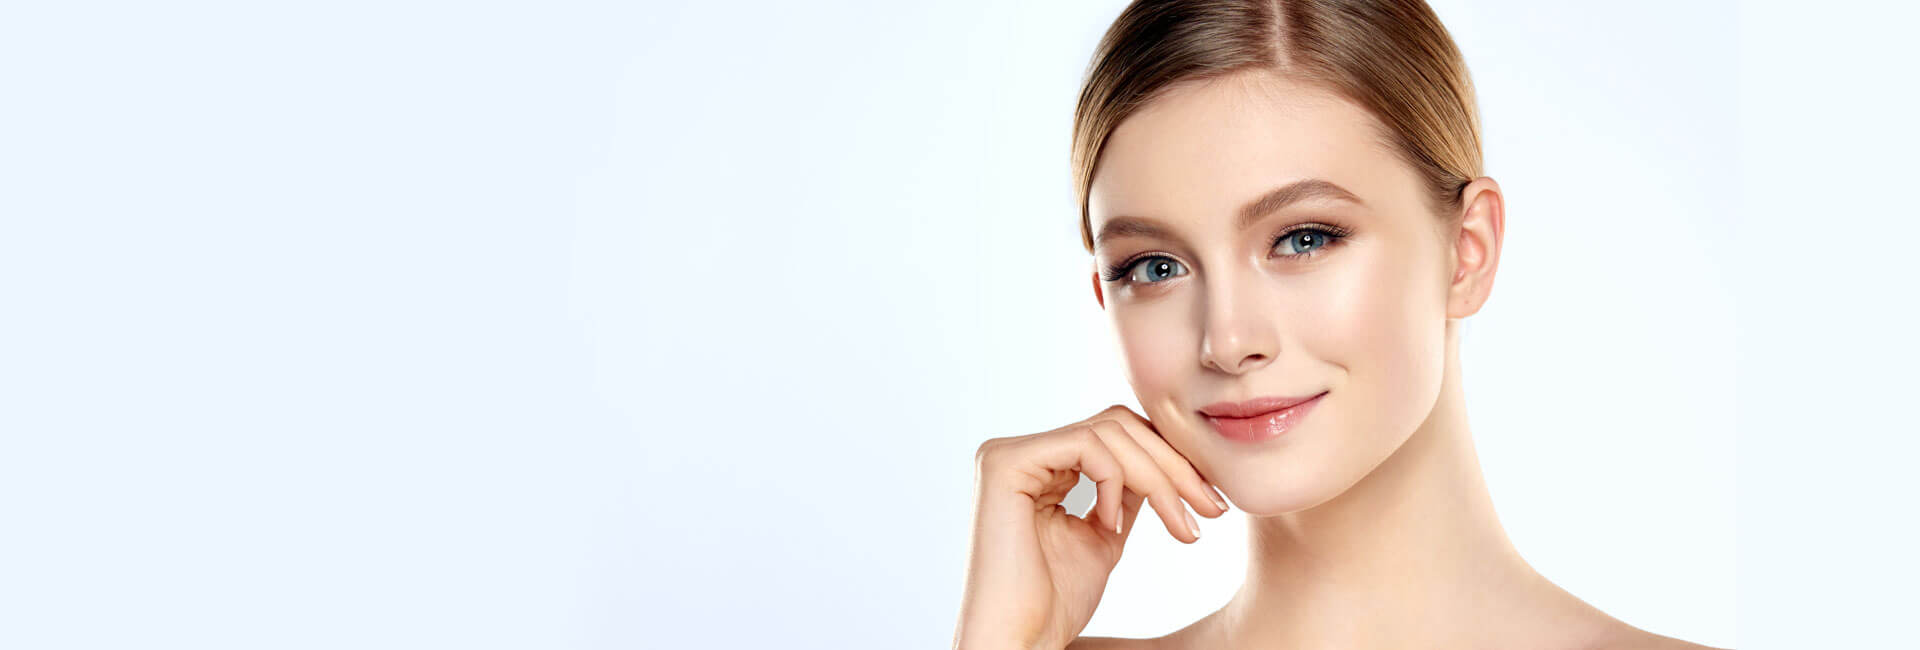 Restylane Treatment at Washington, DC and Annapolis, MD